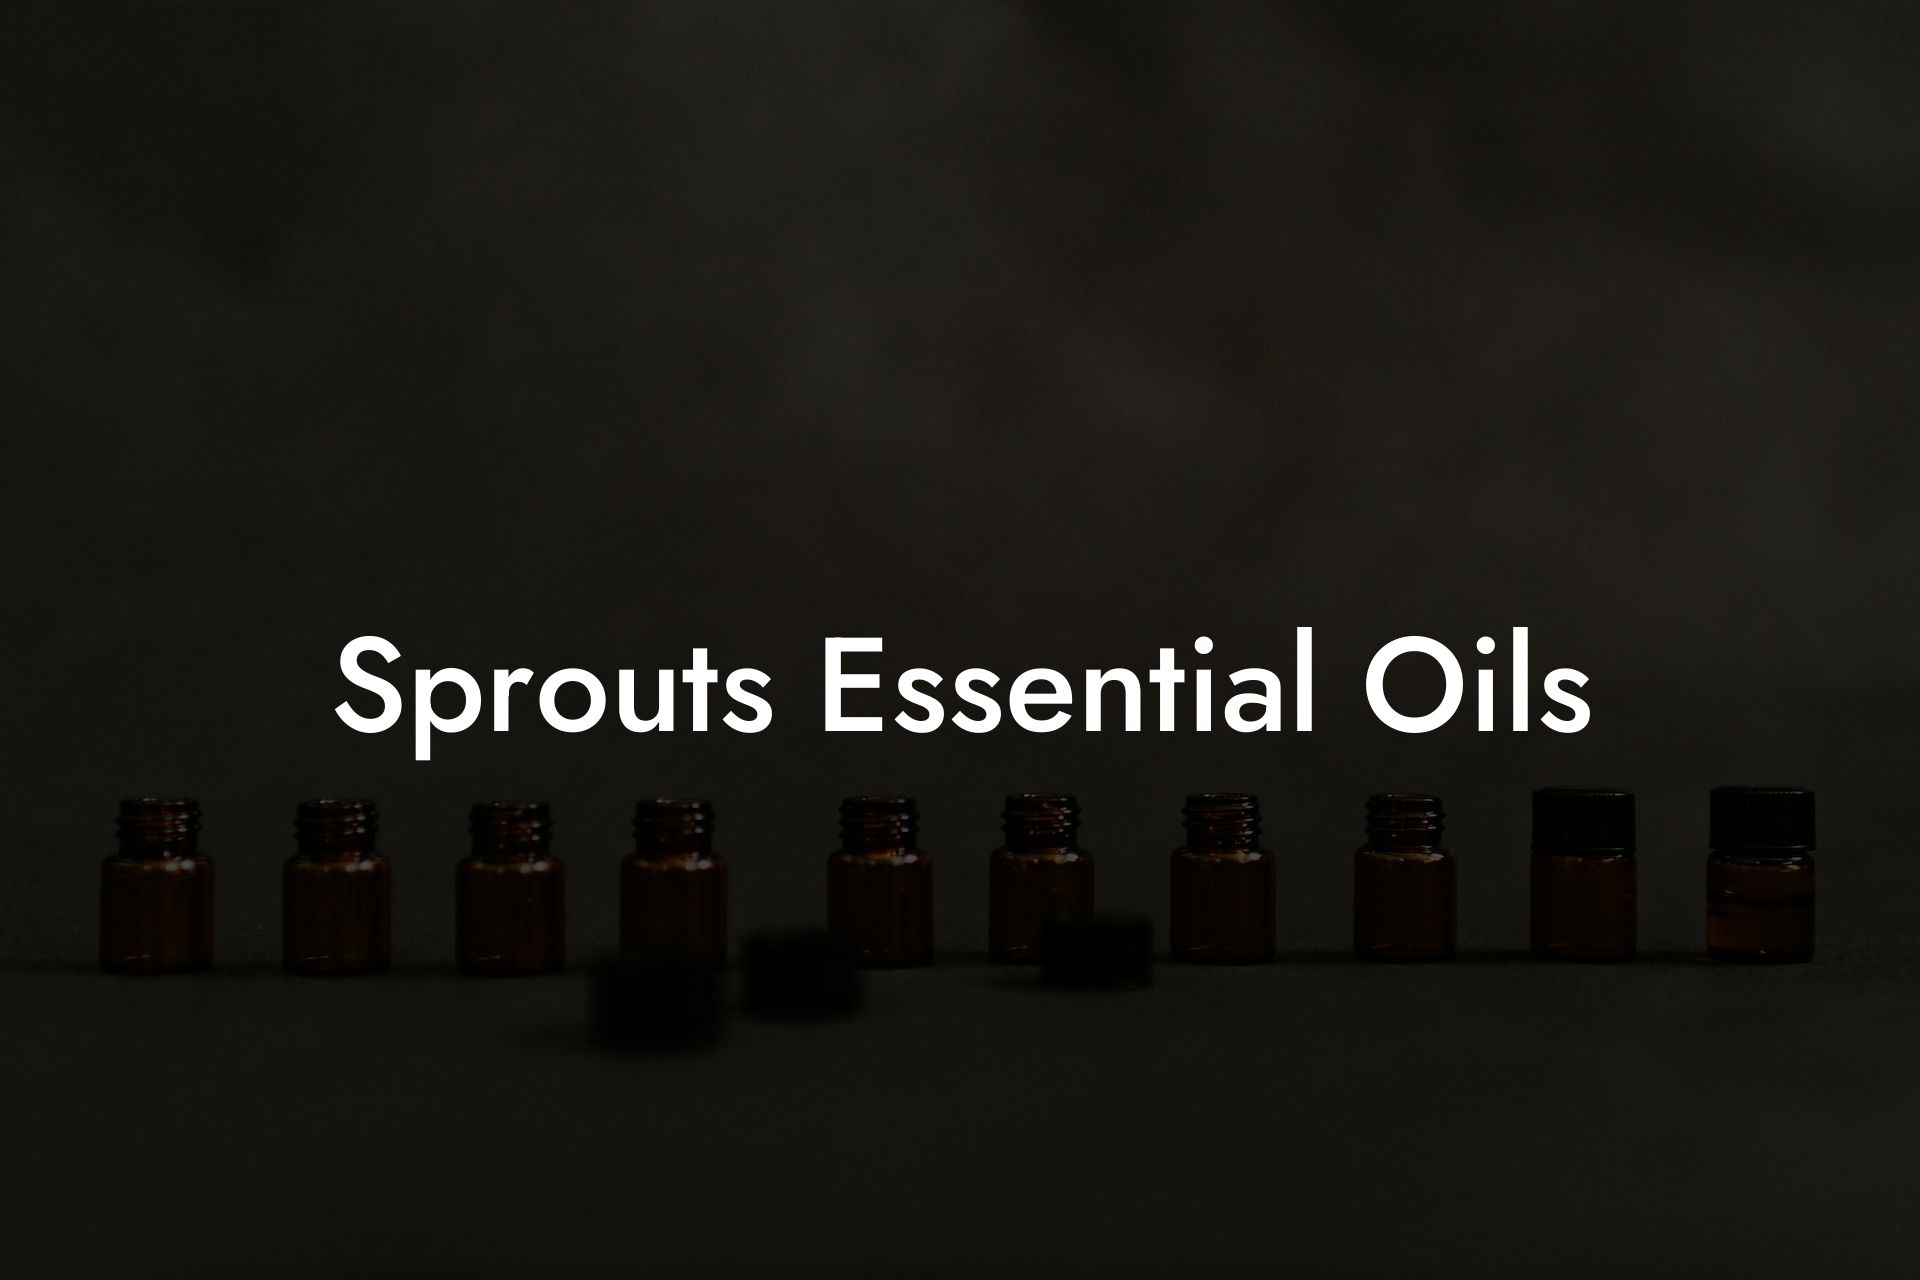 Sprouts Essential Oils